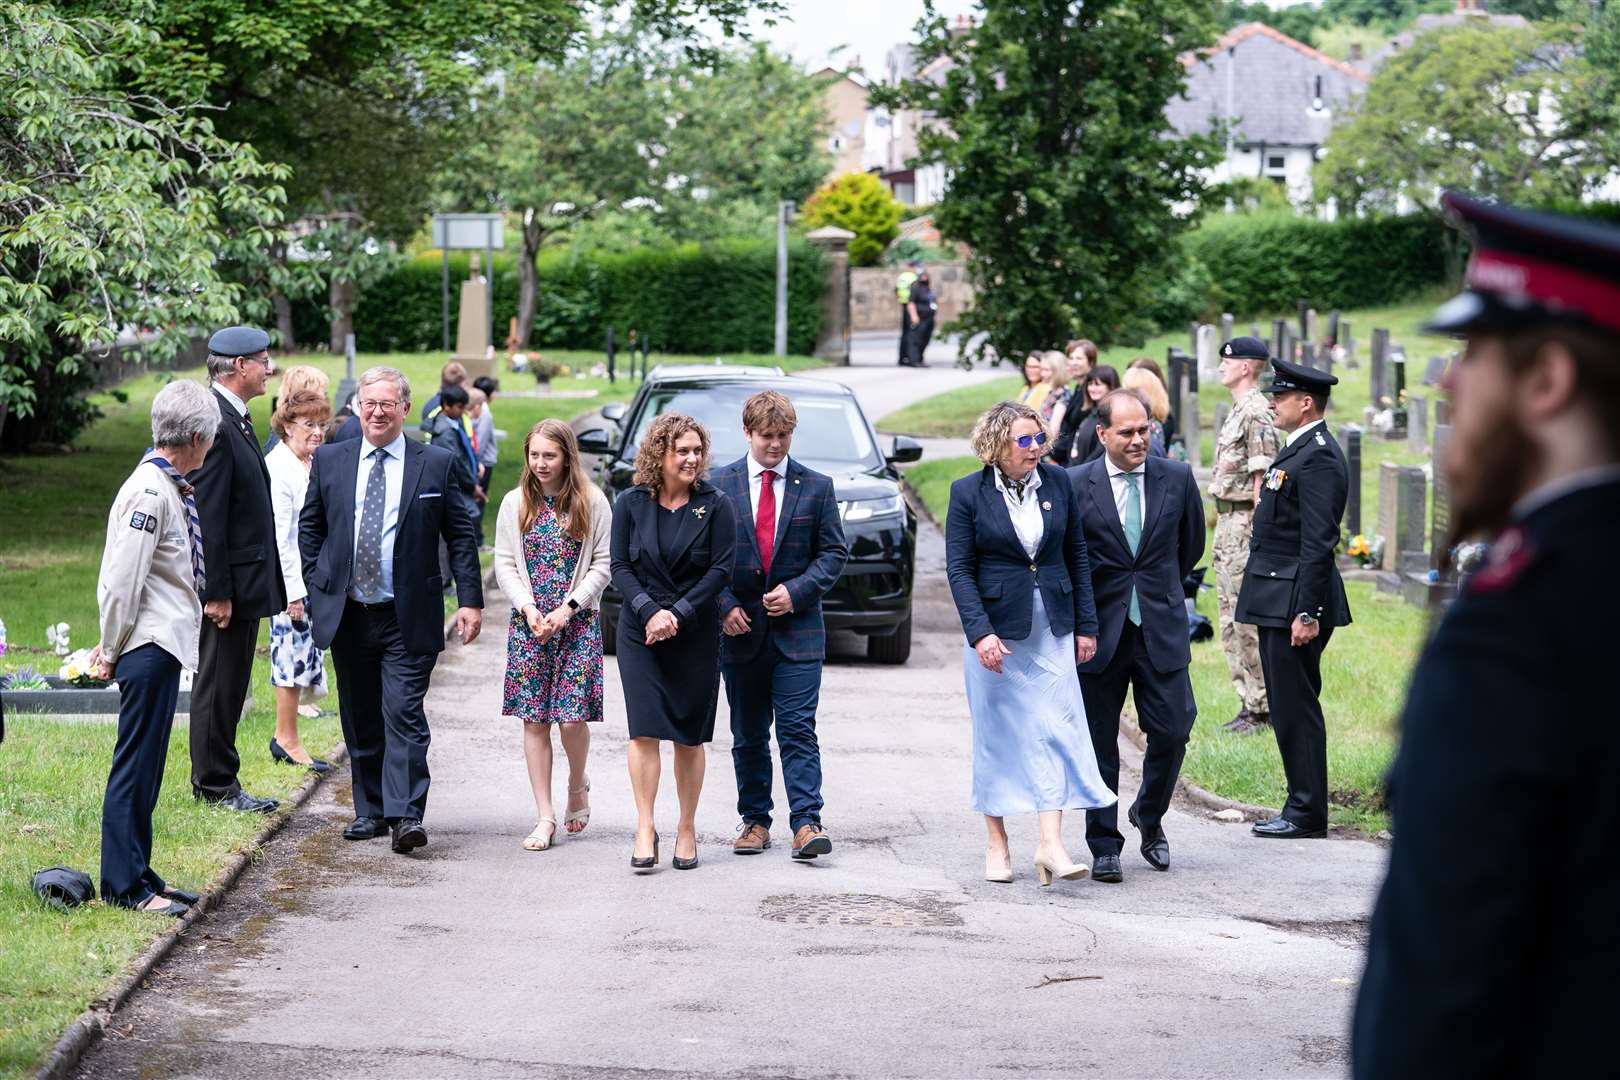 Relatives of Captain Sir Tom Moore (from left) Colin Ingram-Moore (son in law), Georgia Ingram-Moore (granddaughter), Hannah Ingram-Moore (daughter), Benjie Ingram-Moore (grandson), Lucy Teixeira (daughter) and Tom Teixeira (son in law), walk through a guard of honour ahead of burying Sir Tom’s ashes at his family’s grave in Morton Cemetery, Riddlesden (Danny Lawson/PA)